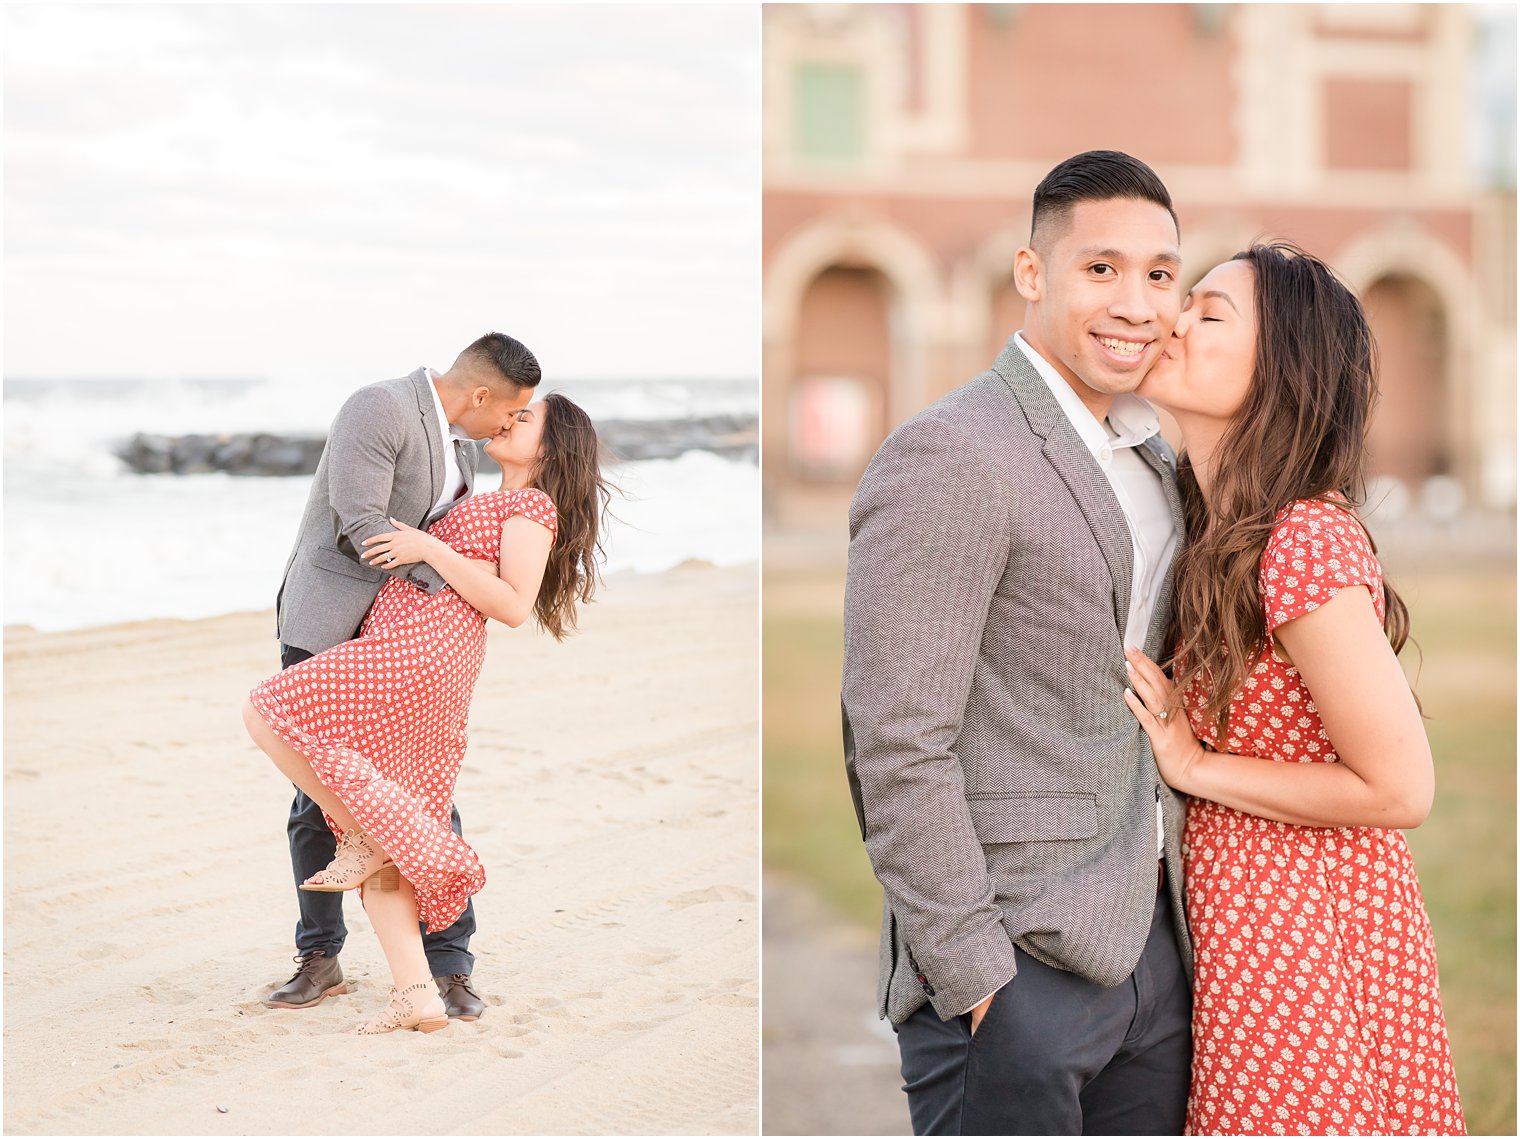 Idalia Photography photographs a late summer engagement session in Asbury Park